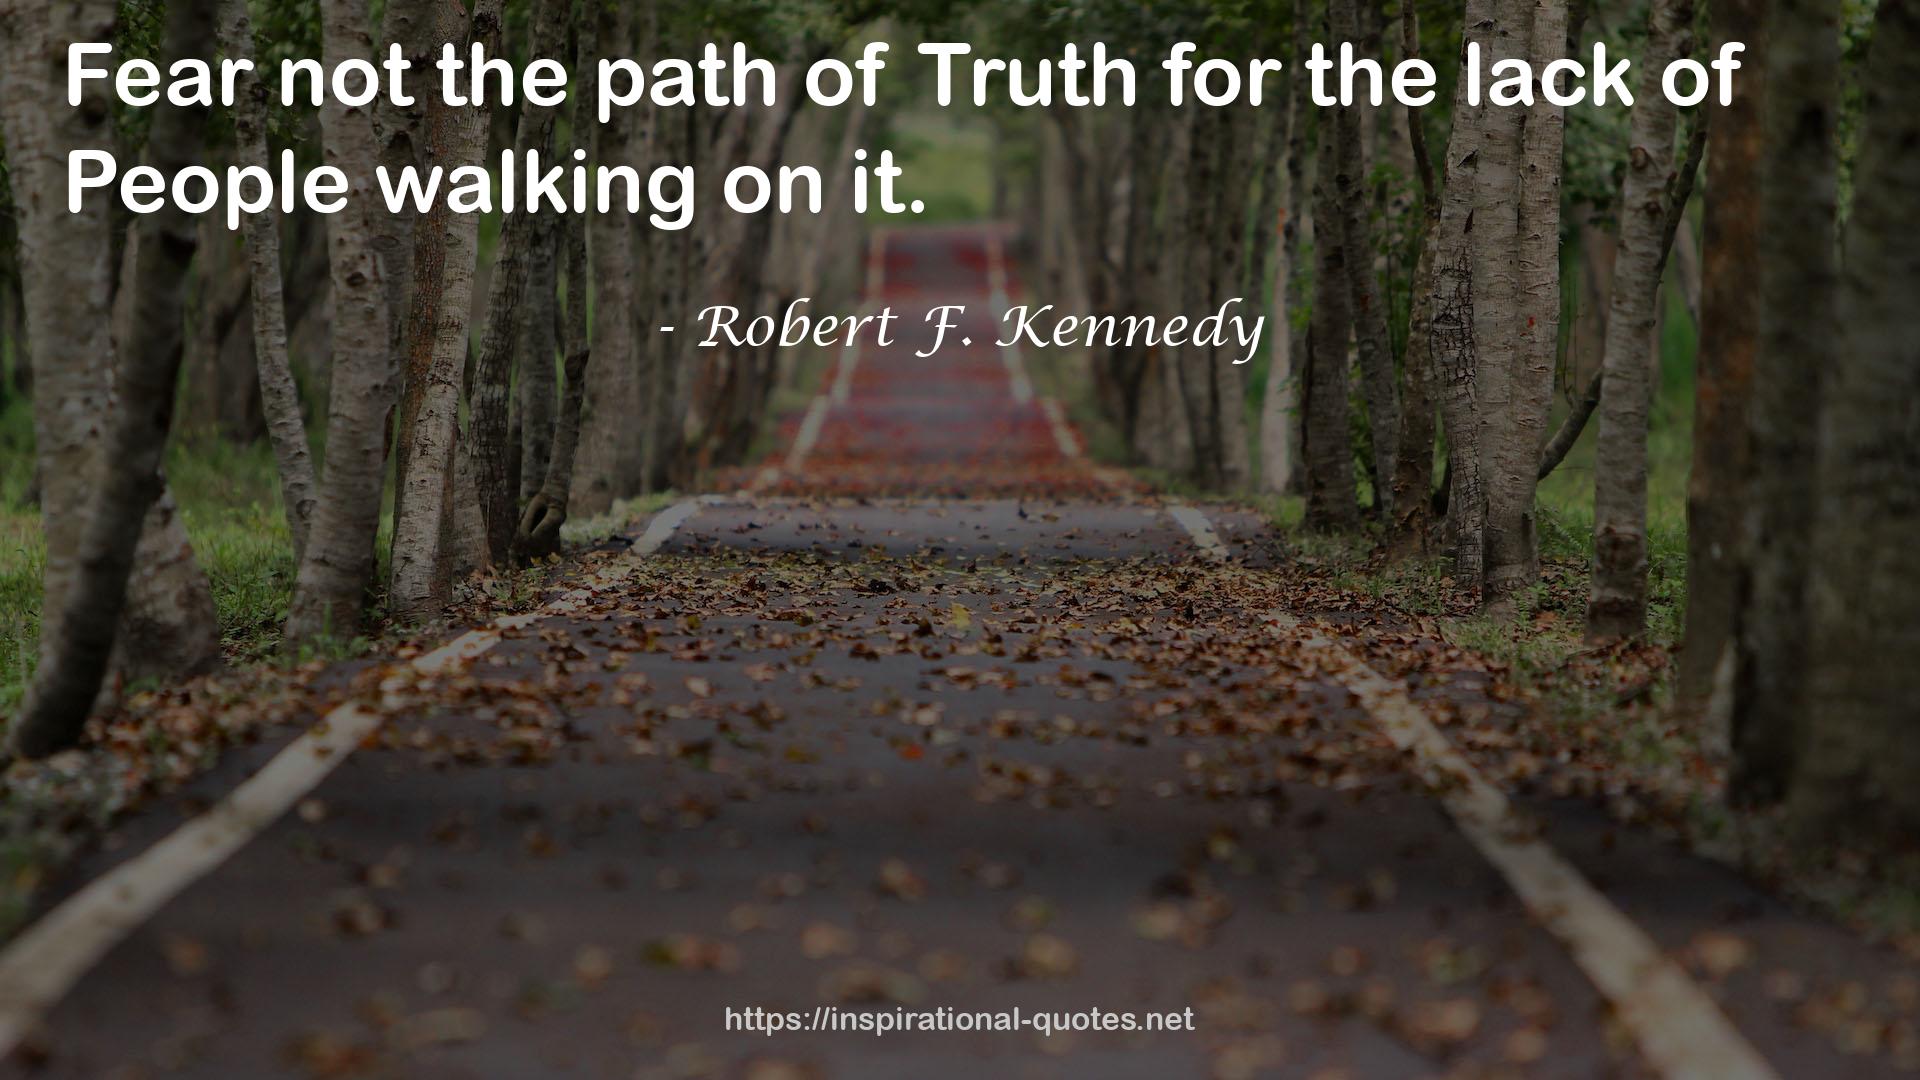 Robert F. Kennedy QUOTES